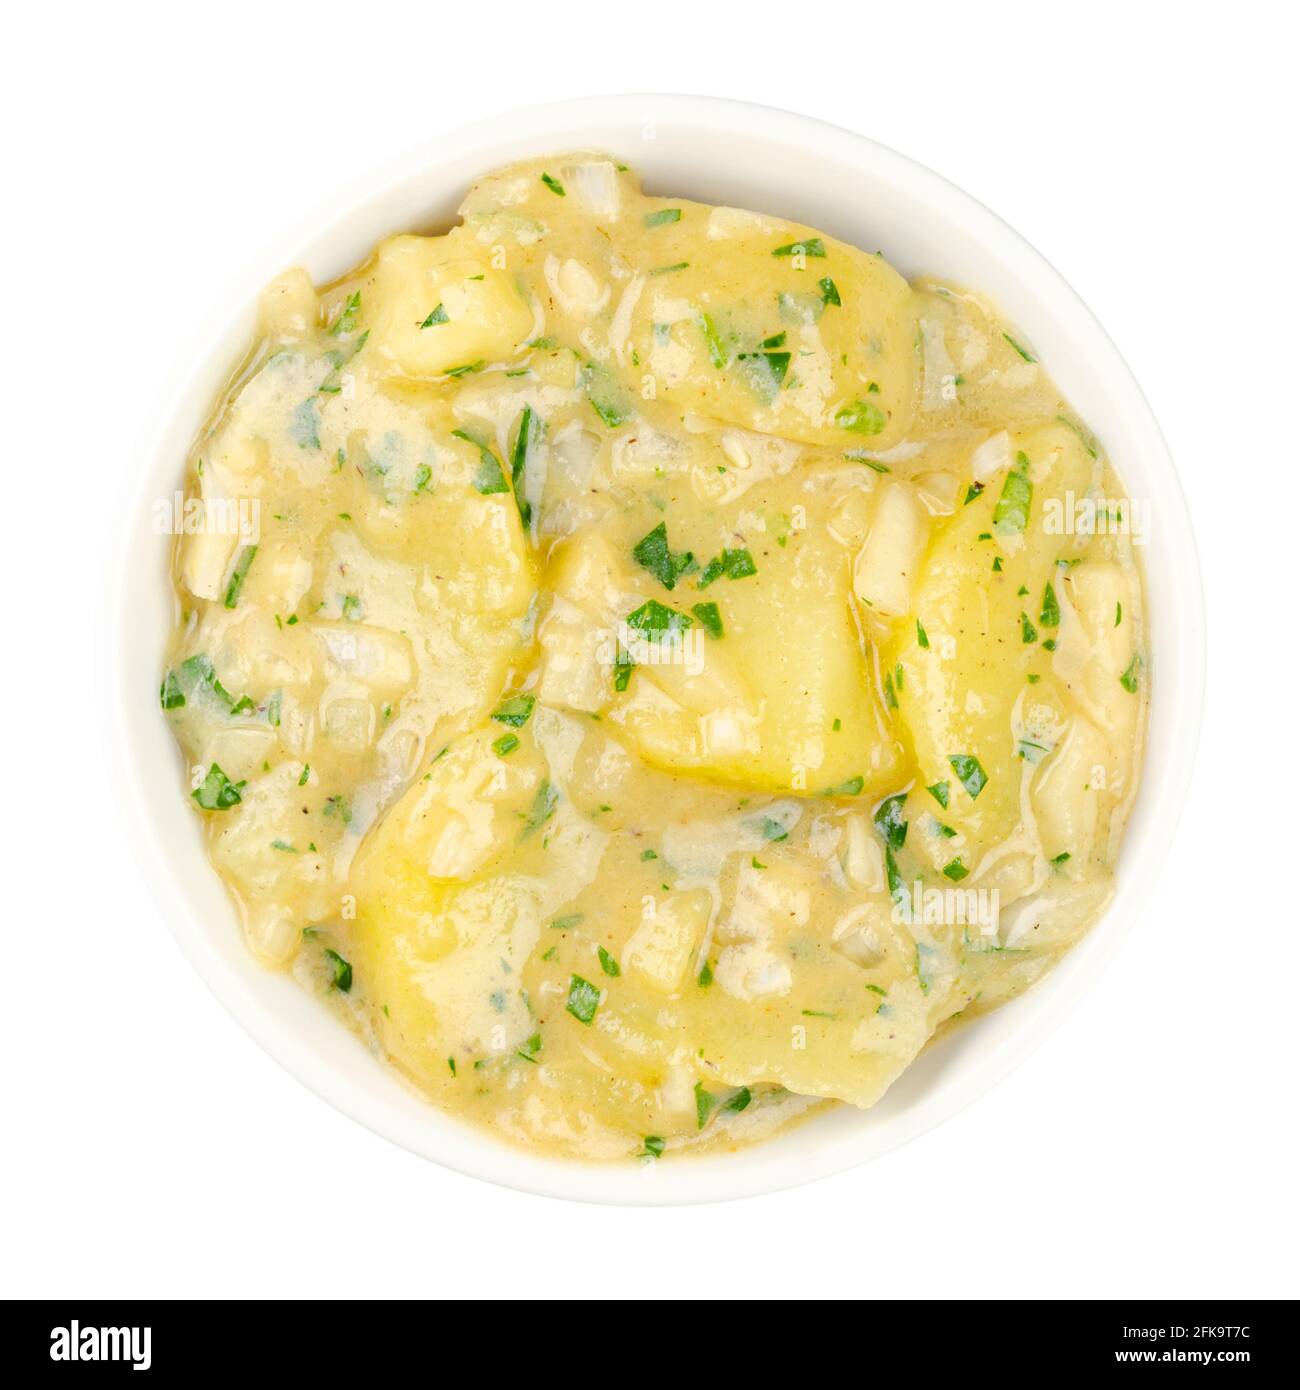 Potato salad with oil and vinegar in white bowl. Traditional German and Austrian side dish made from boiled potatoes, oil, vinegar, onion and parsley. Stock Photo